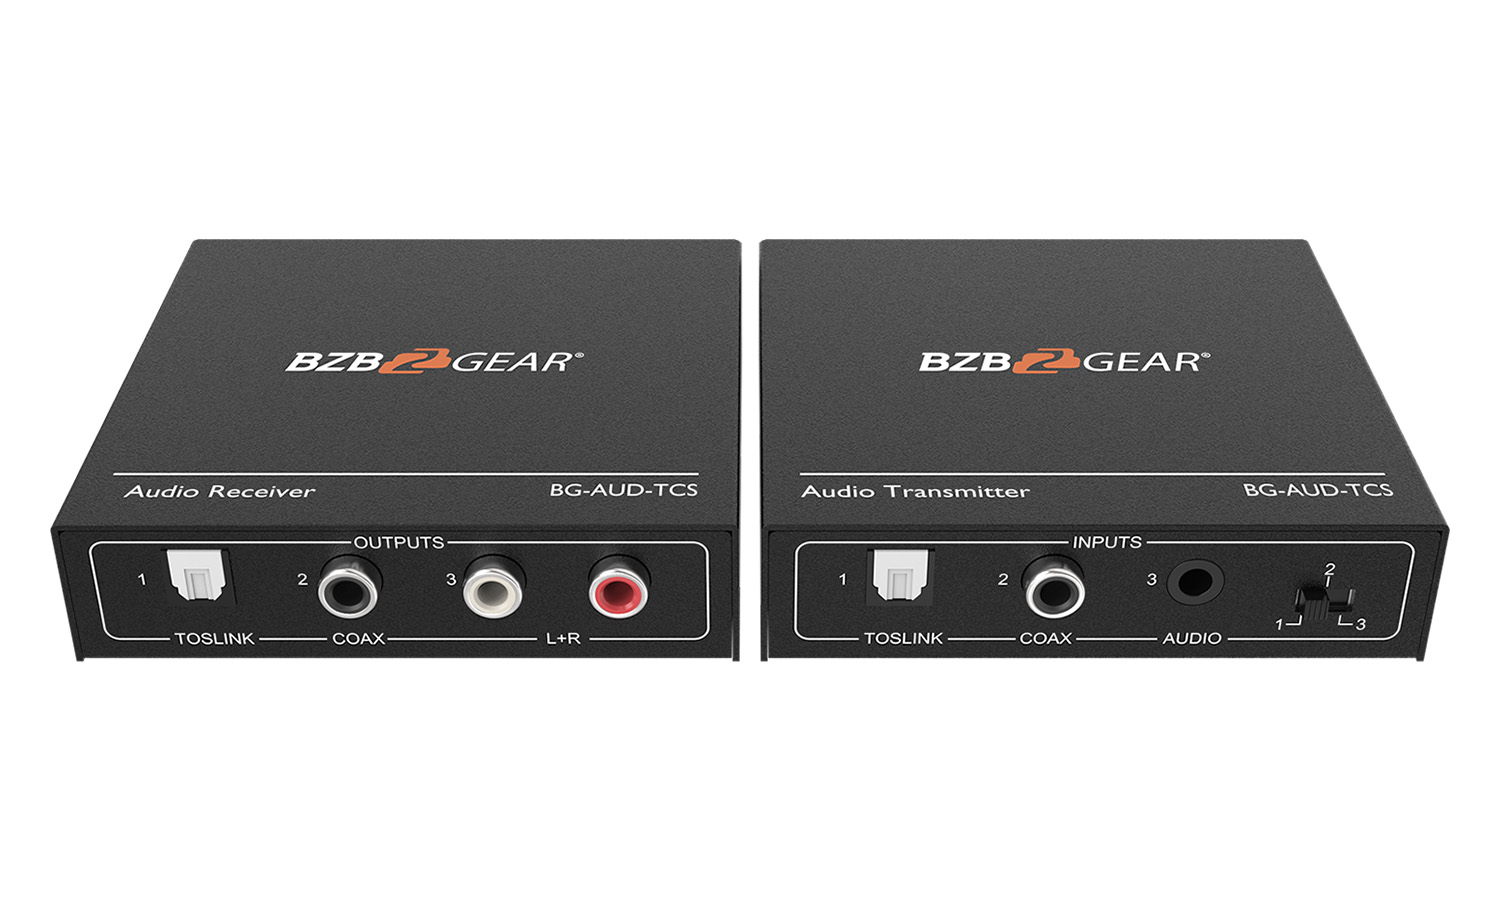 BG-AUD-TCS Stereo/TOSLINK/COAX Audio Extender (Transmitter/Receiver) over Cat5e/6/7 up to 950ft by BZBGEAR